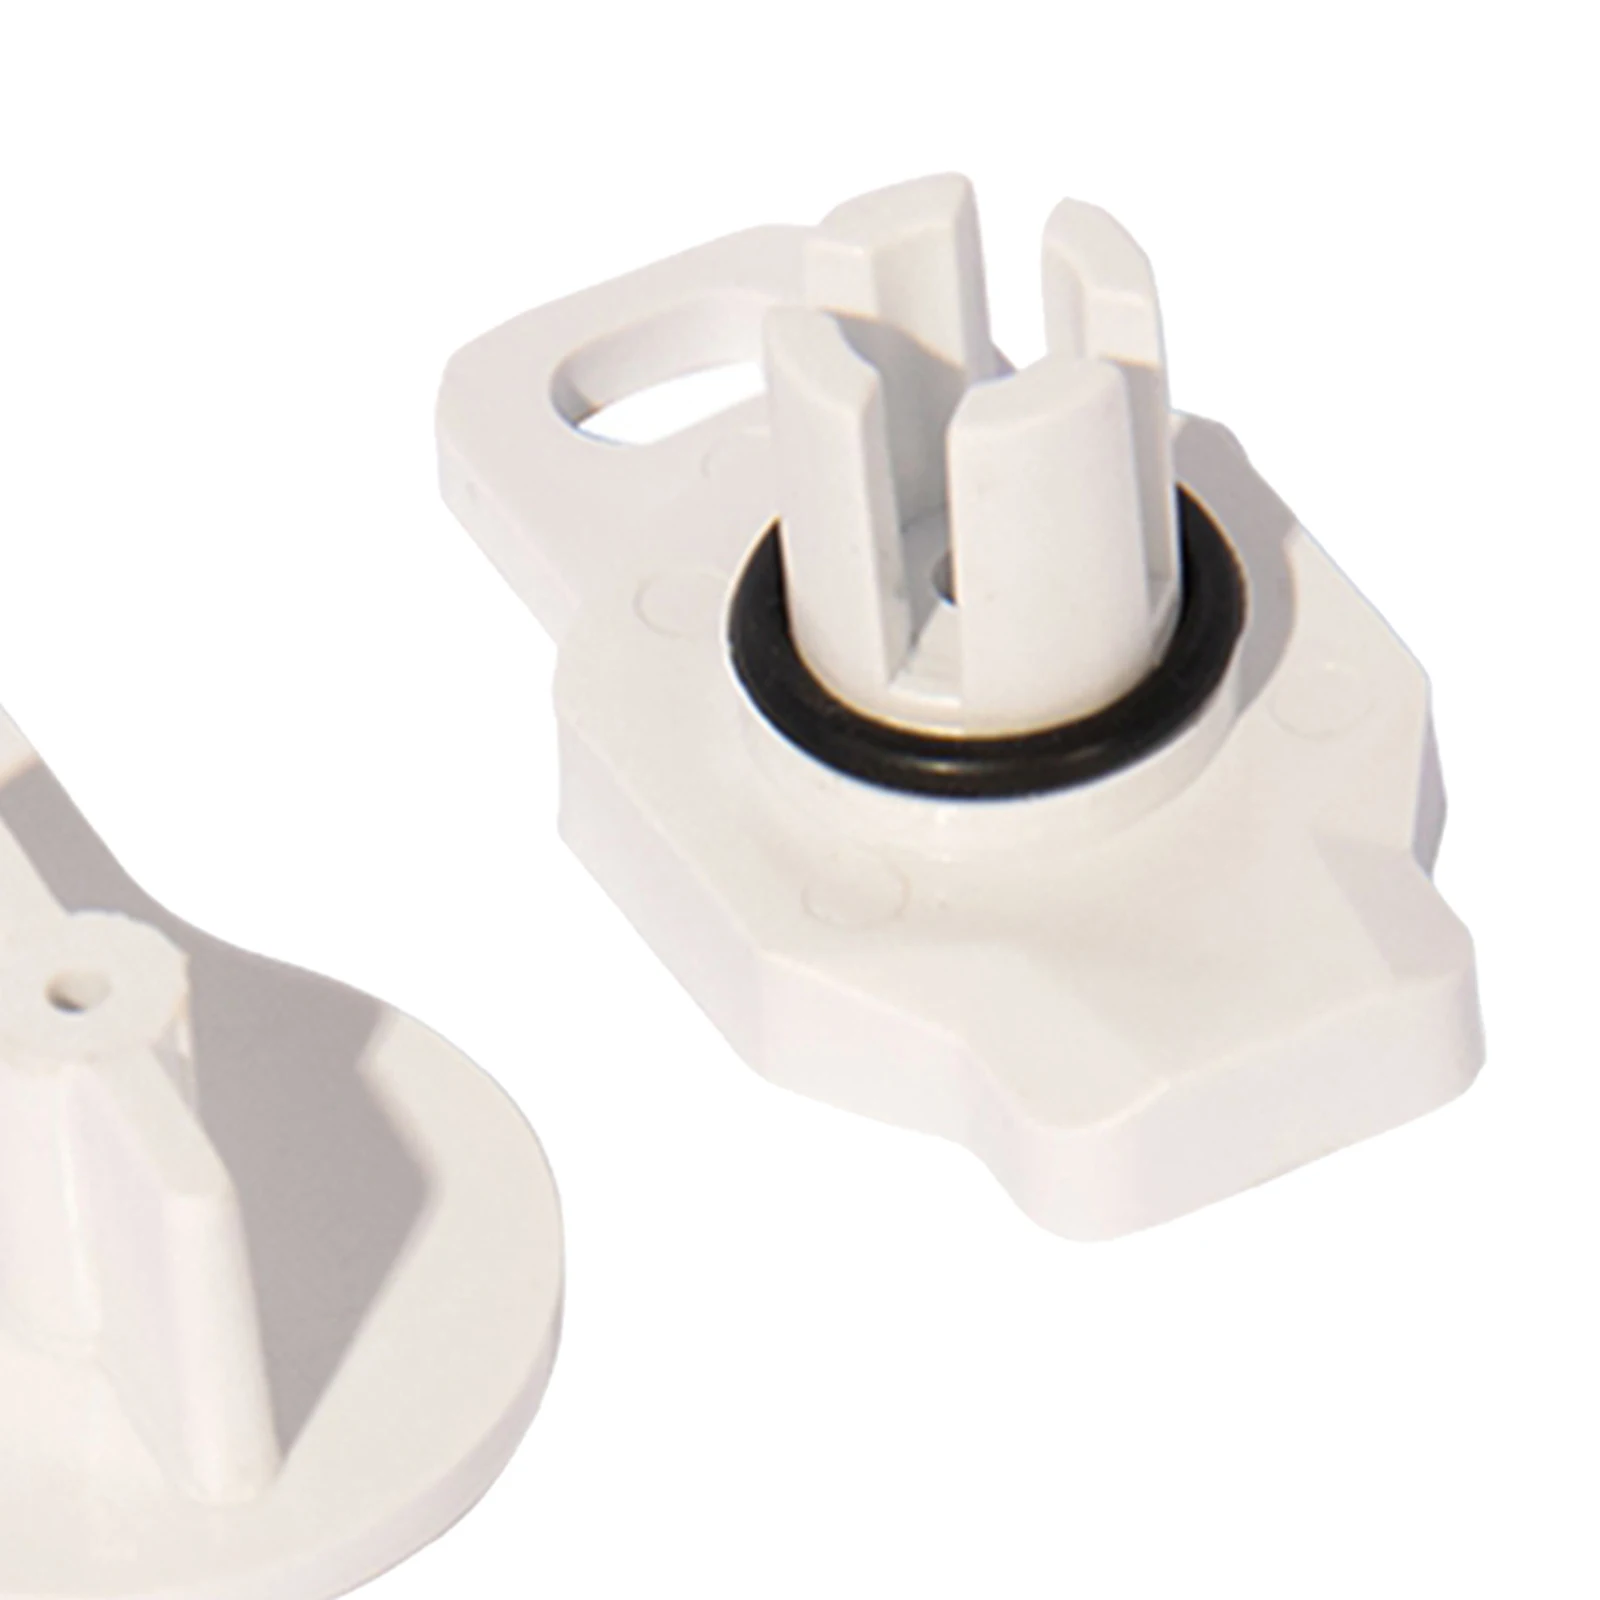 Plastic Manhole Hatch Cover Fast Boat Floor Deck Cover Latch Lock Part